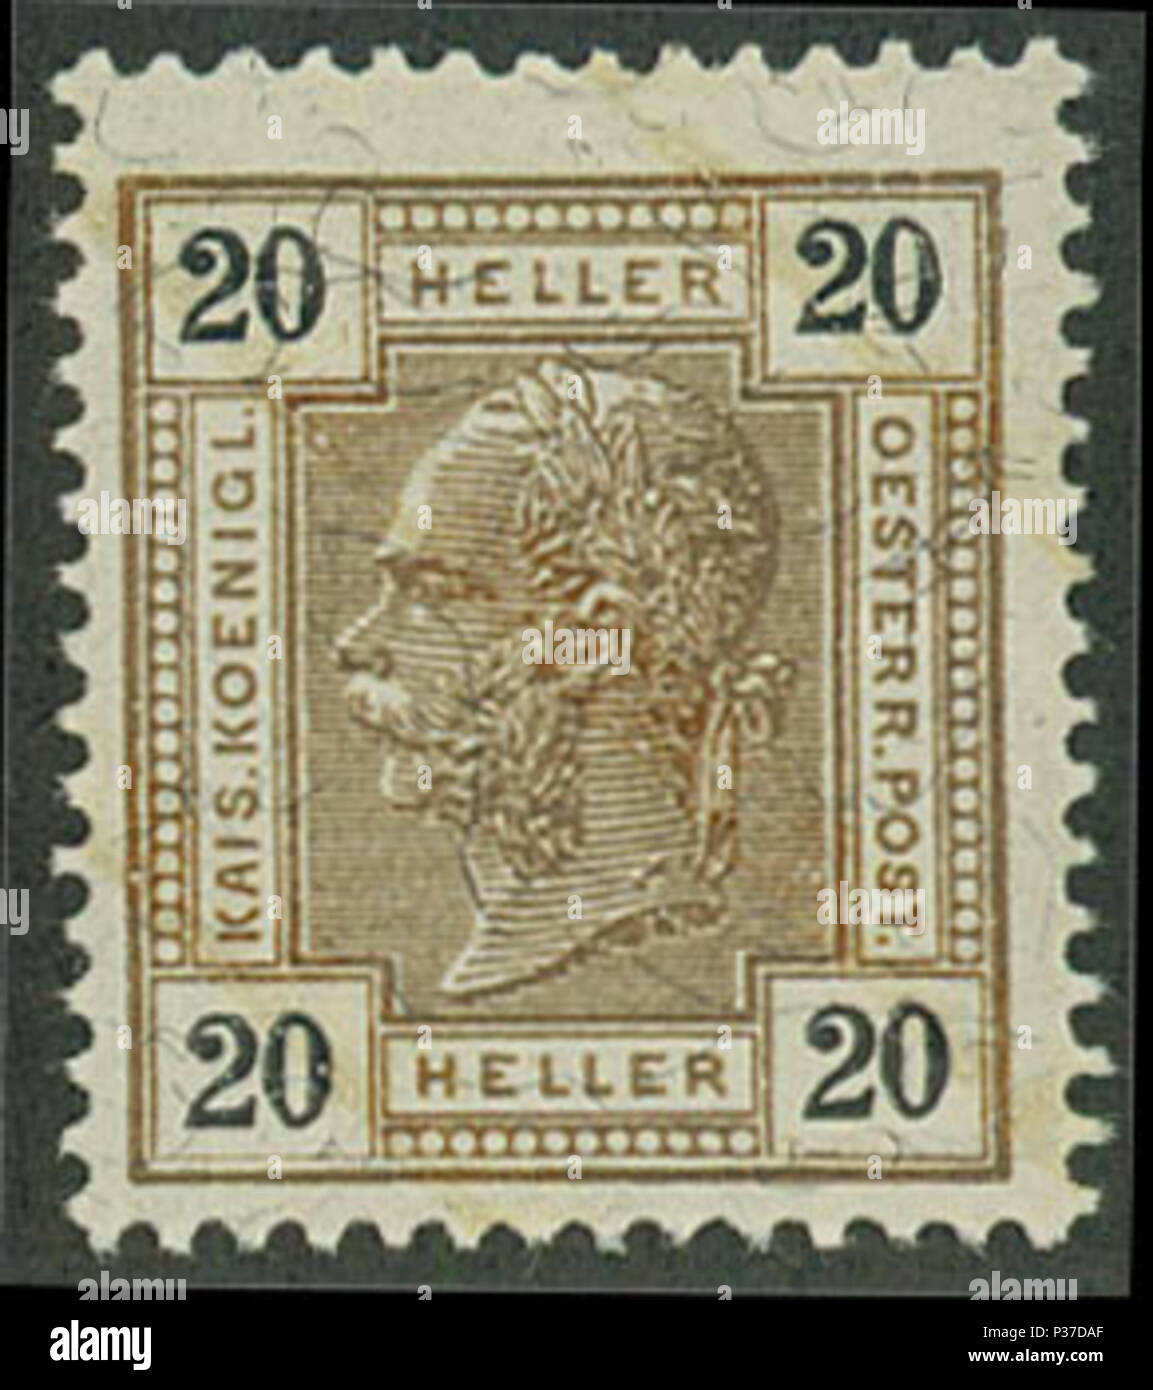 . English: Austrian stamp issued 1904, face value of 20 heller, showing Emperor Franz Josef in profile, printed on granite paper and bearing varnish bars over the design as an anti-forgery device. 1904. Imperial Austrian government 1 Austria 1910 20h Franz Josef varnish bar Stock Photo